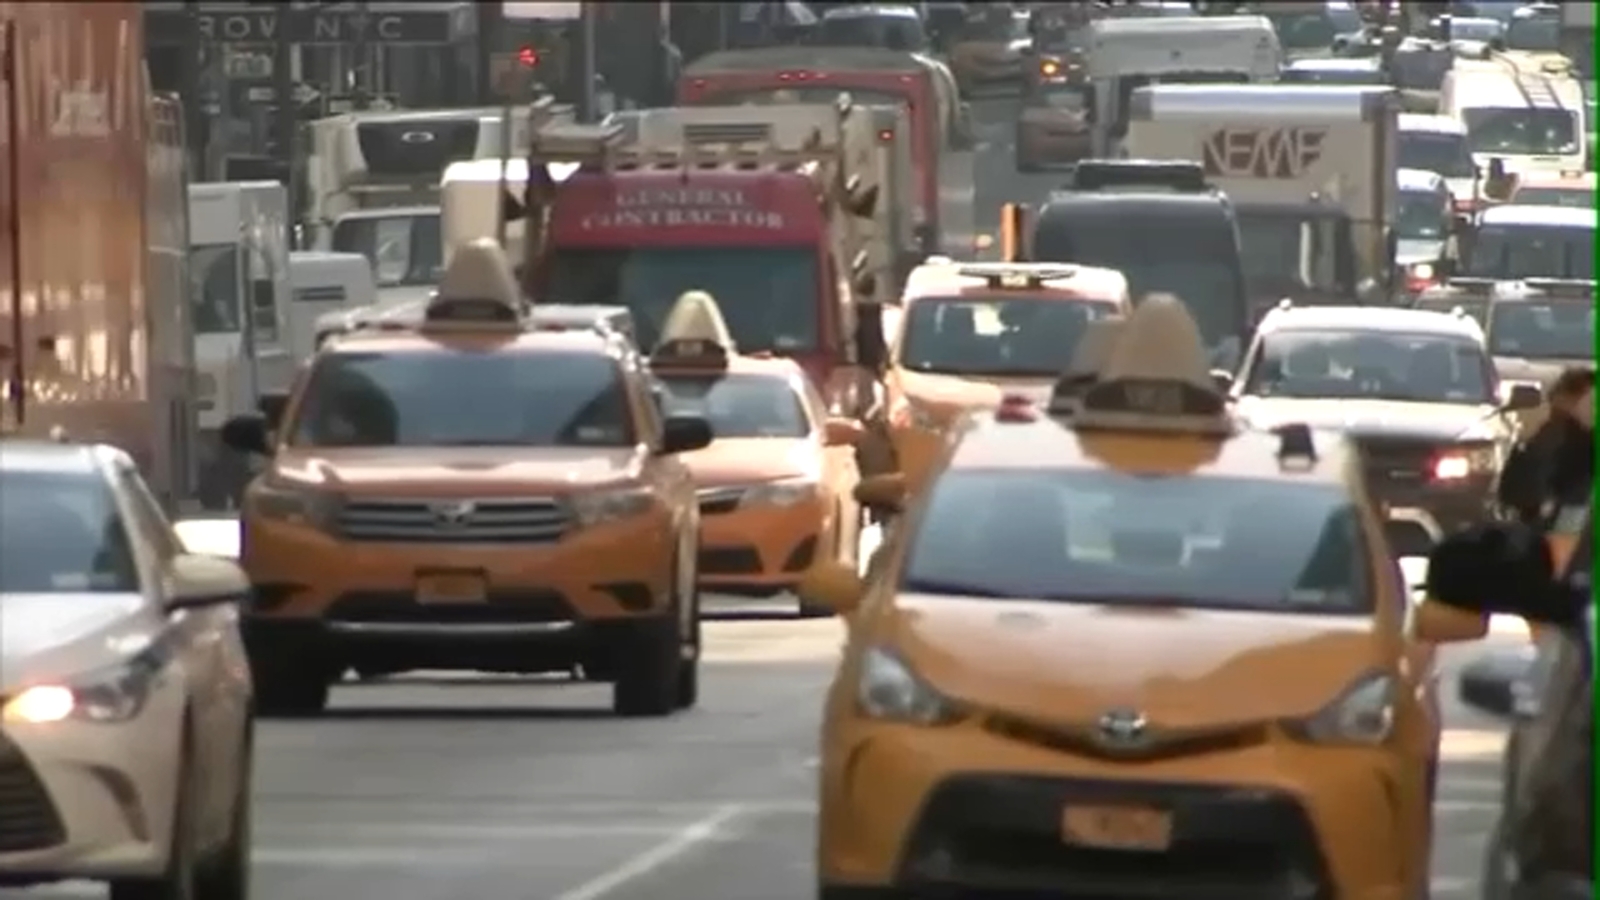 Congestion pricing NYC: Town of Hempstead is 1st on Long Island to file lawsuit against tolling plan [Video]